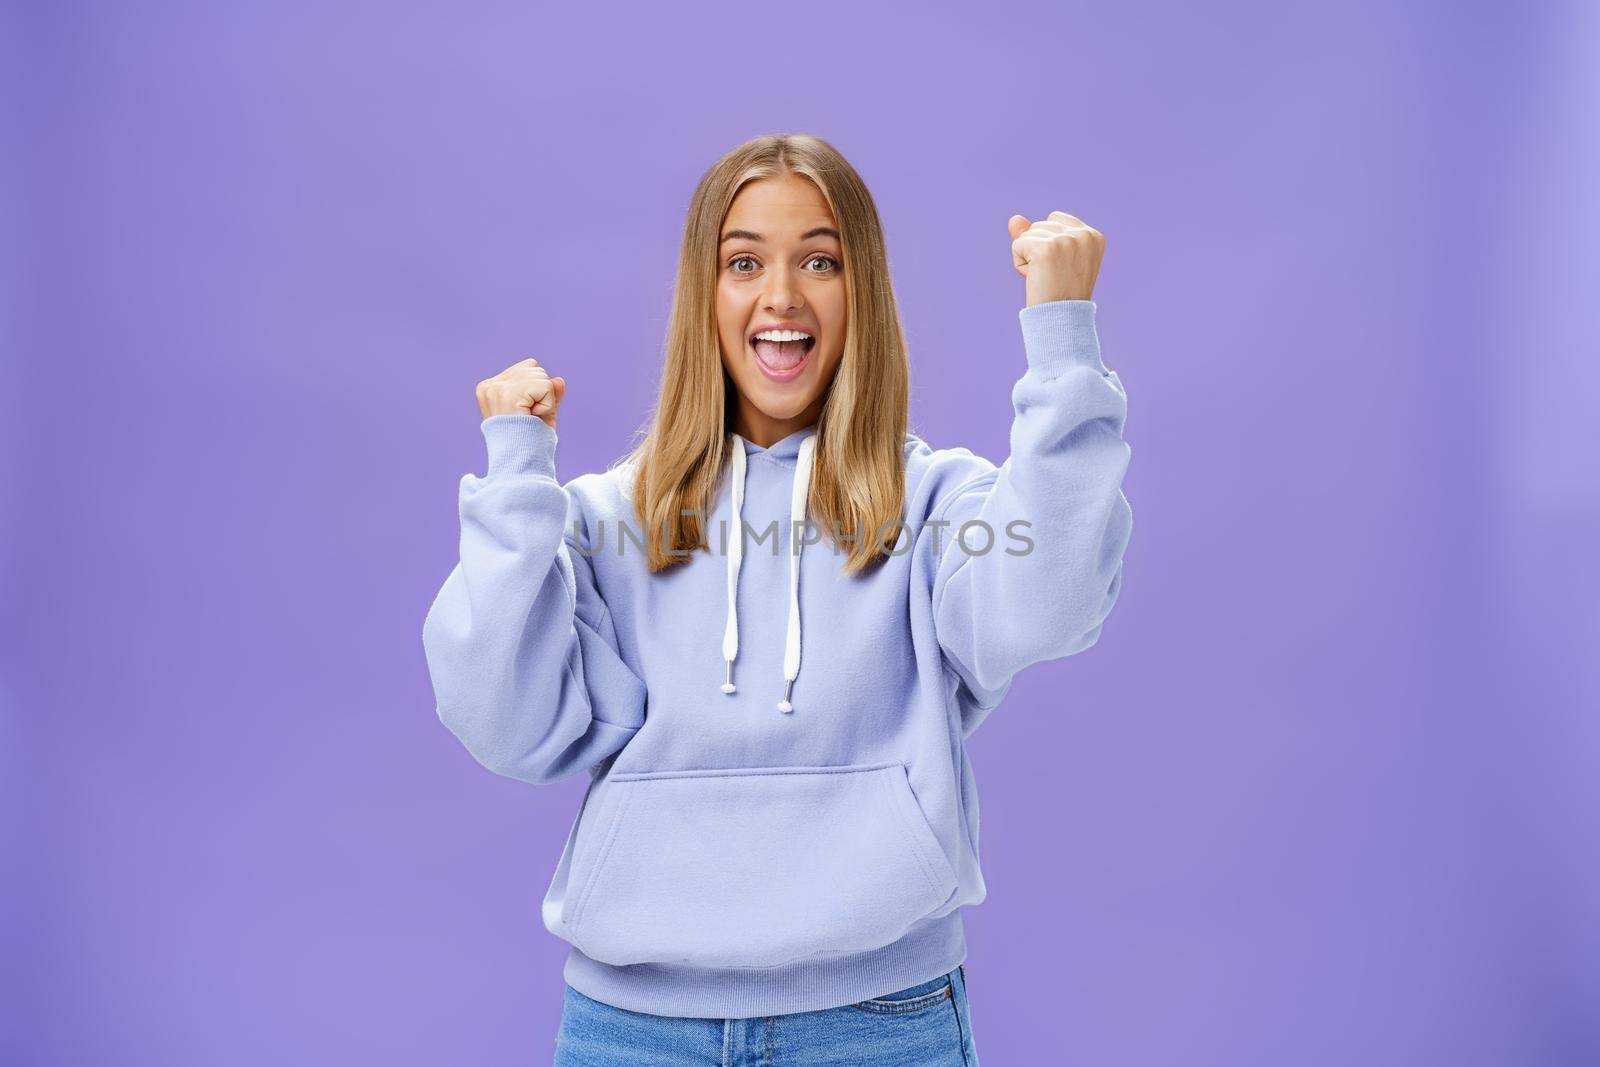 Cheerful happy and supportive young girlfriend with fair hair and tan in warm hoodide raising fists in cheer and triumph smiling saying yeah celebrating goal or success over purple background. Lifestyle.